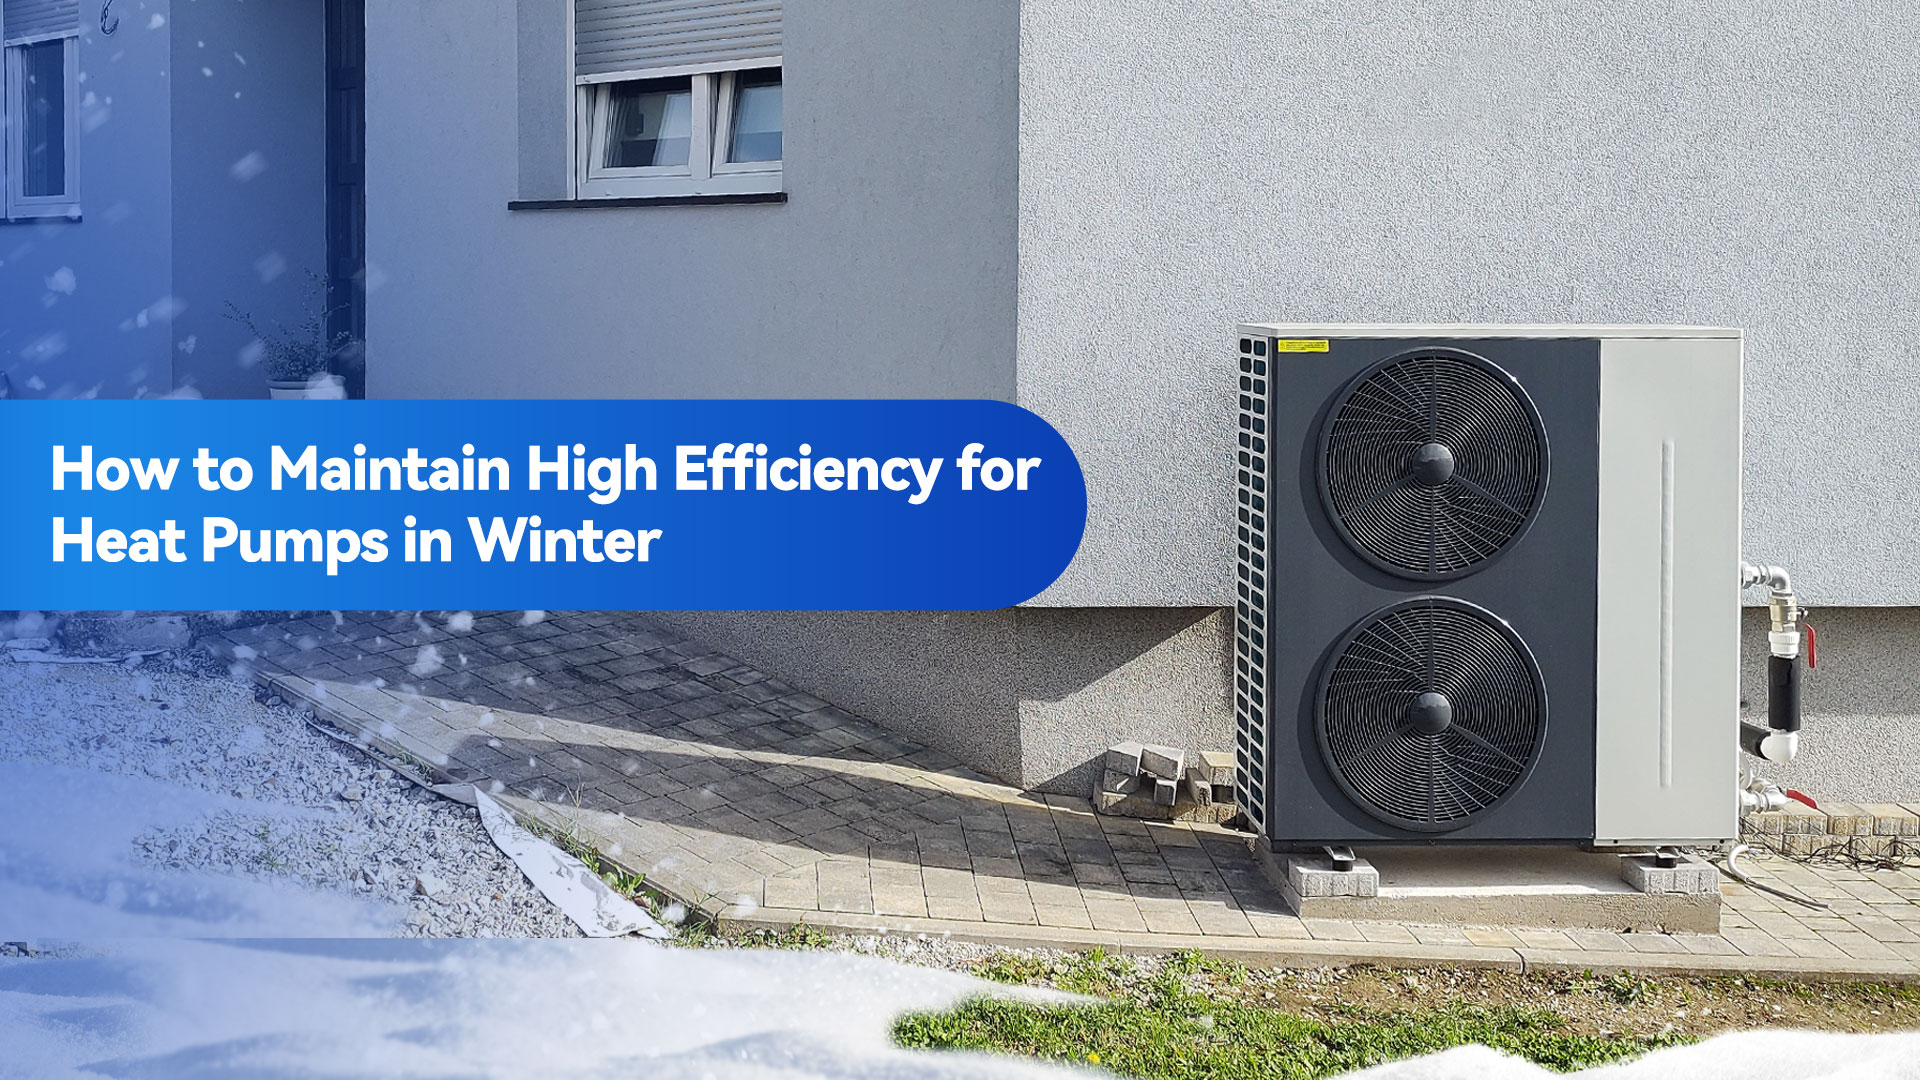 NEWNTIDE Offers Four Practical Ways to Maintain High Efficiency for Heat Pumps in Winter